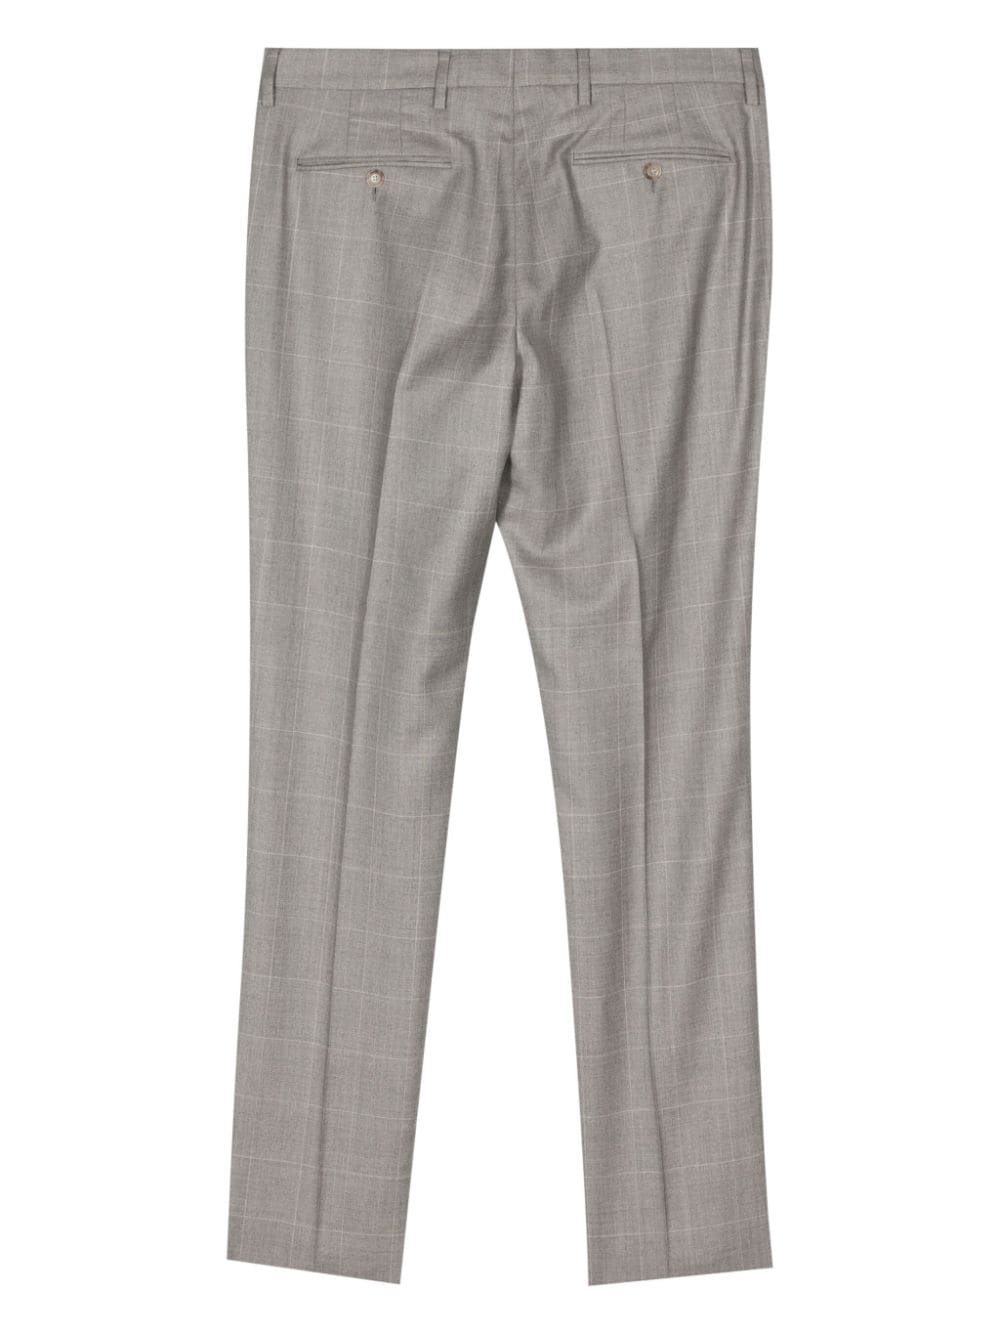 Paul Smith checked tailored trousers - Grijs